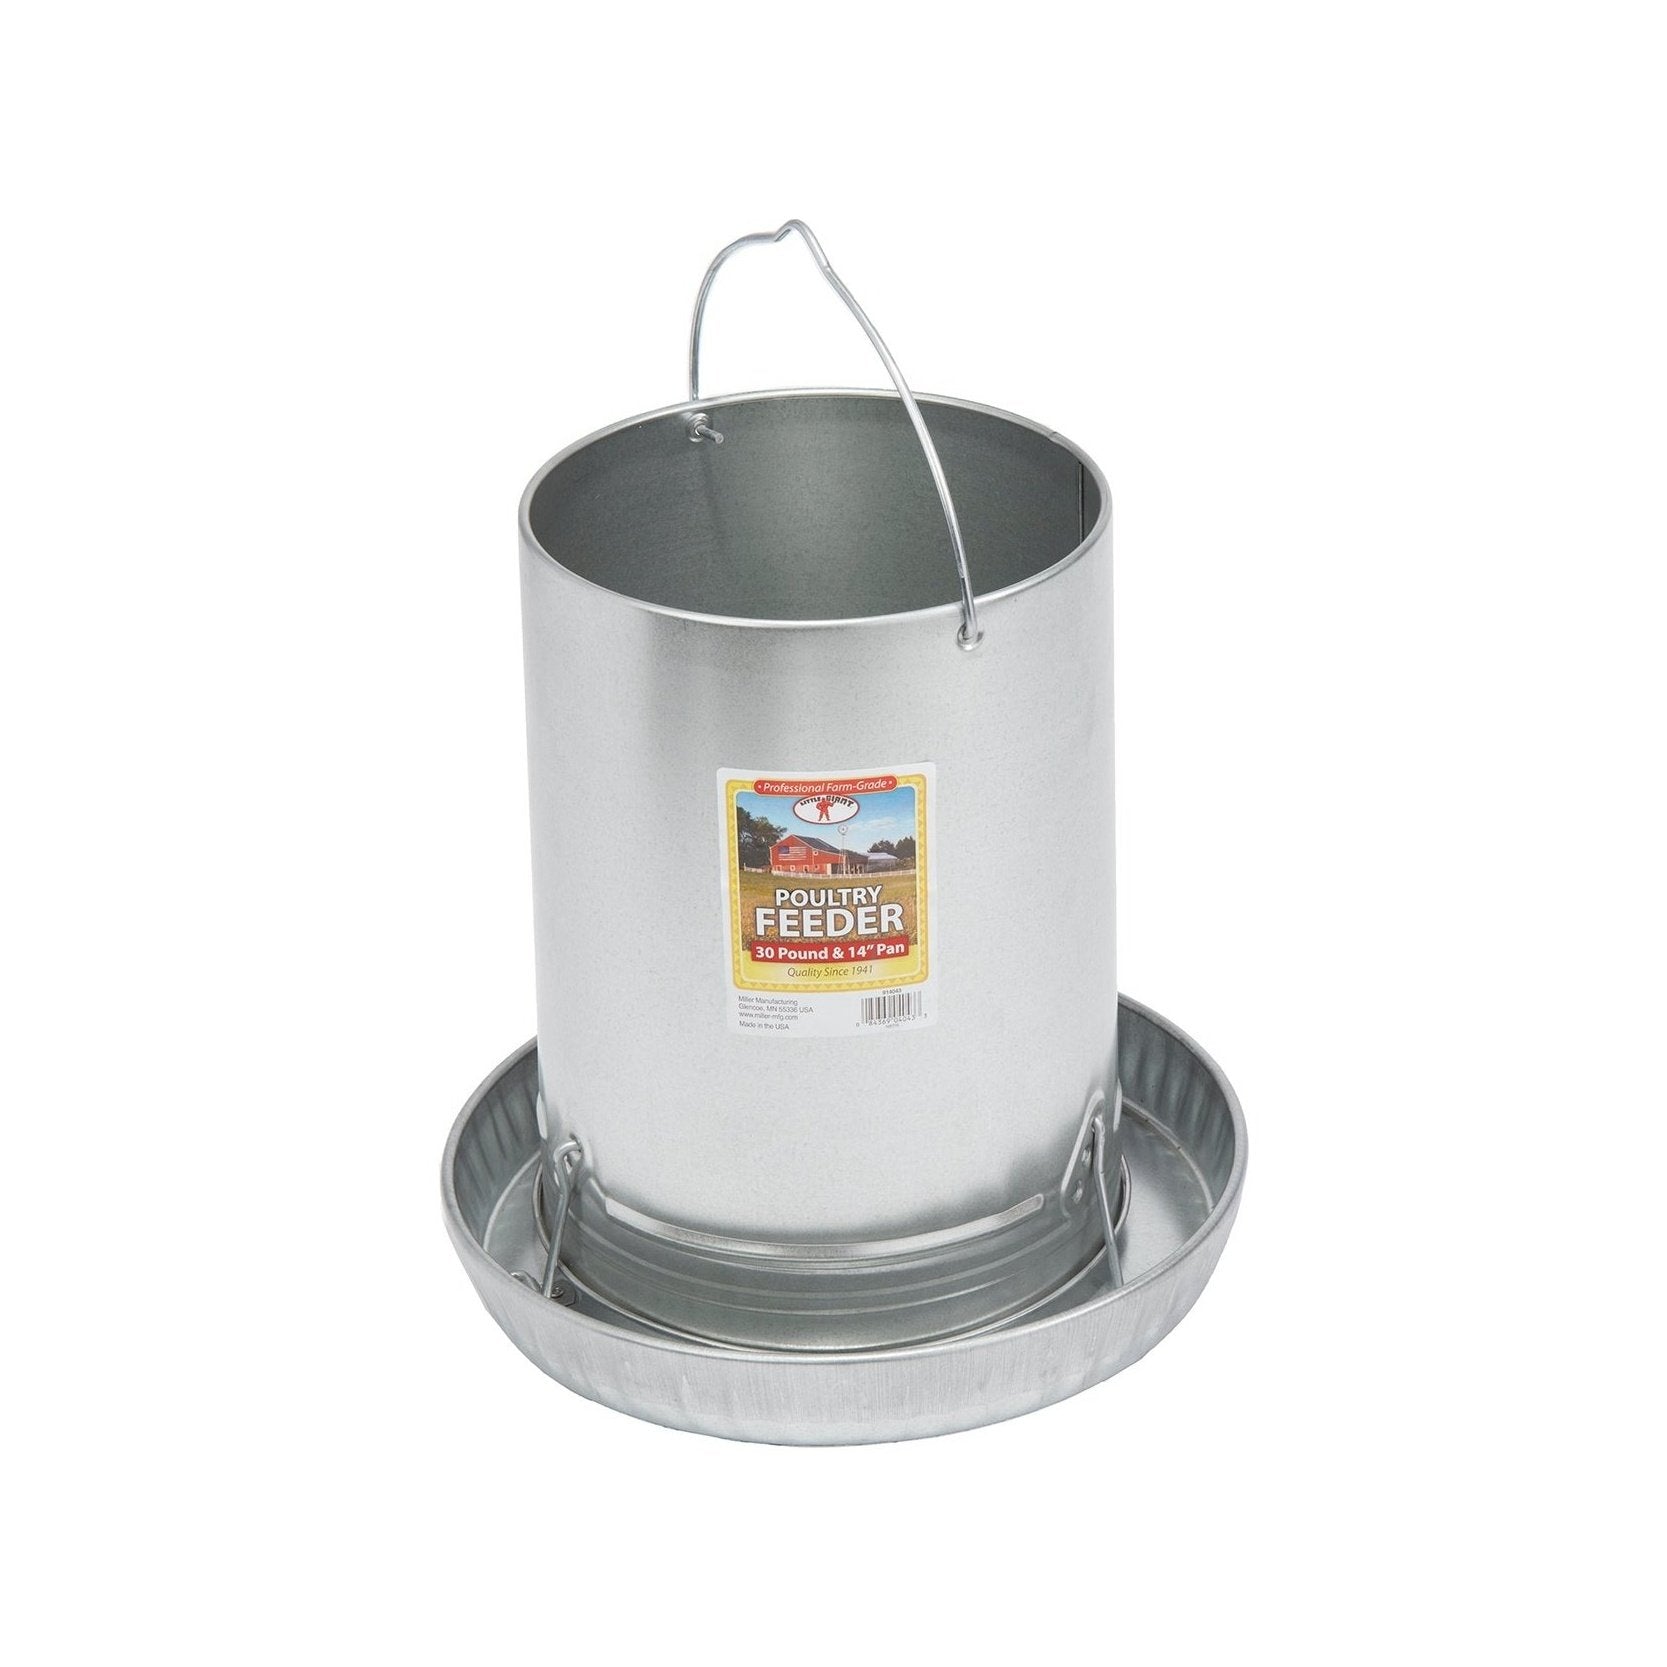 Little Giant - 30-Pound Hanging Metal Poultry Feeder